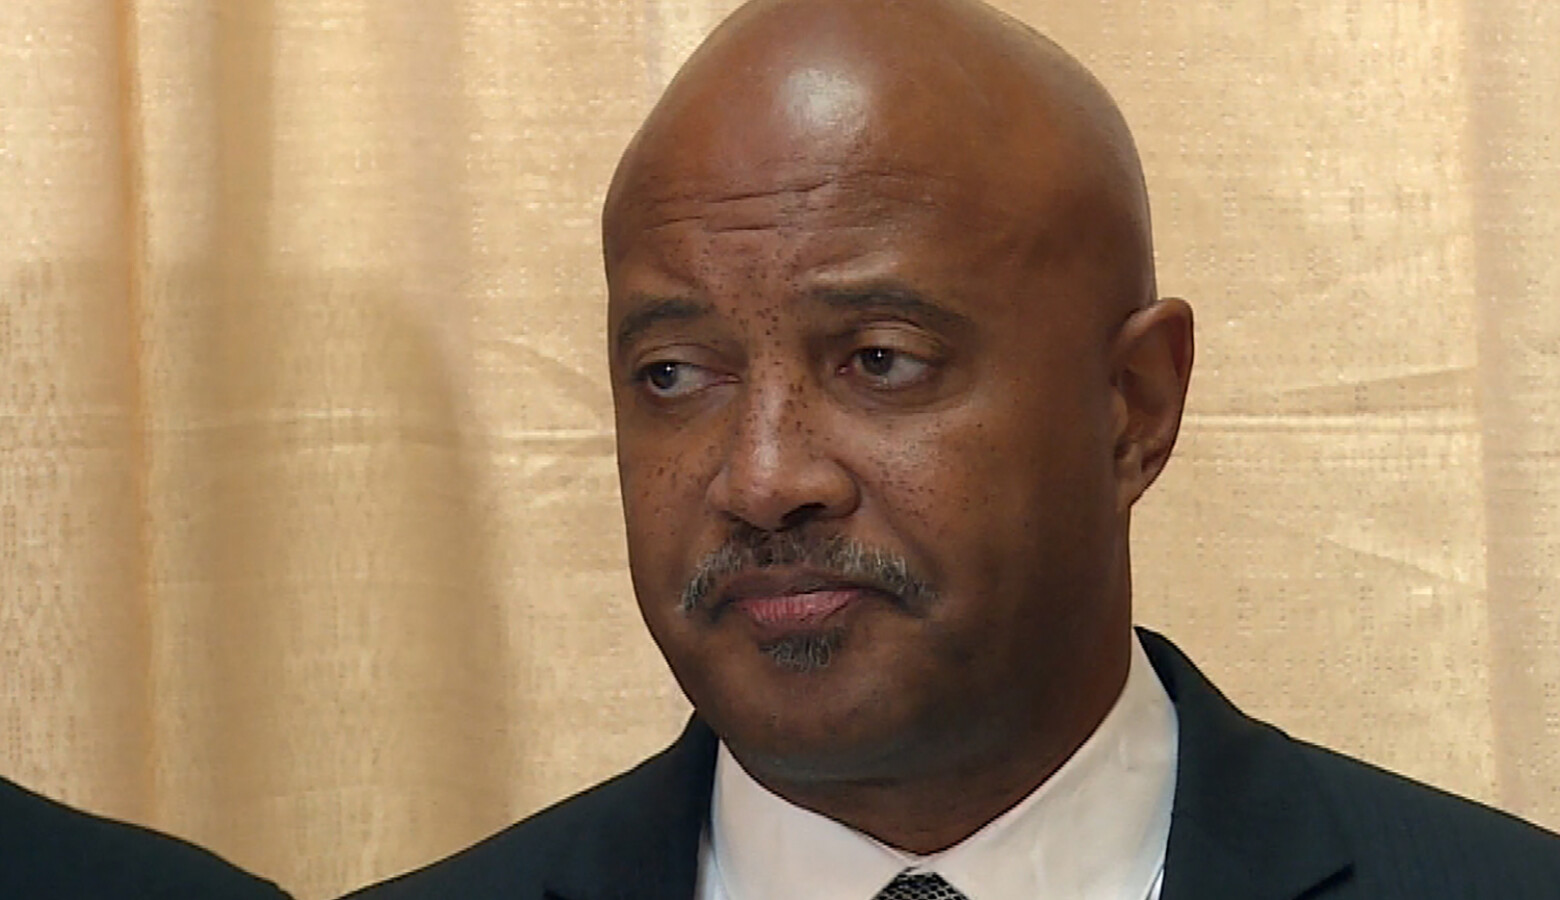 The Indiana Supreme Court suspended Attorney General Curtis Hill's law license for 30 days after it determined he criminally battered four women. (WFIU/WTIU)